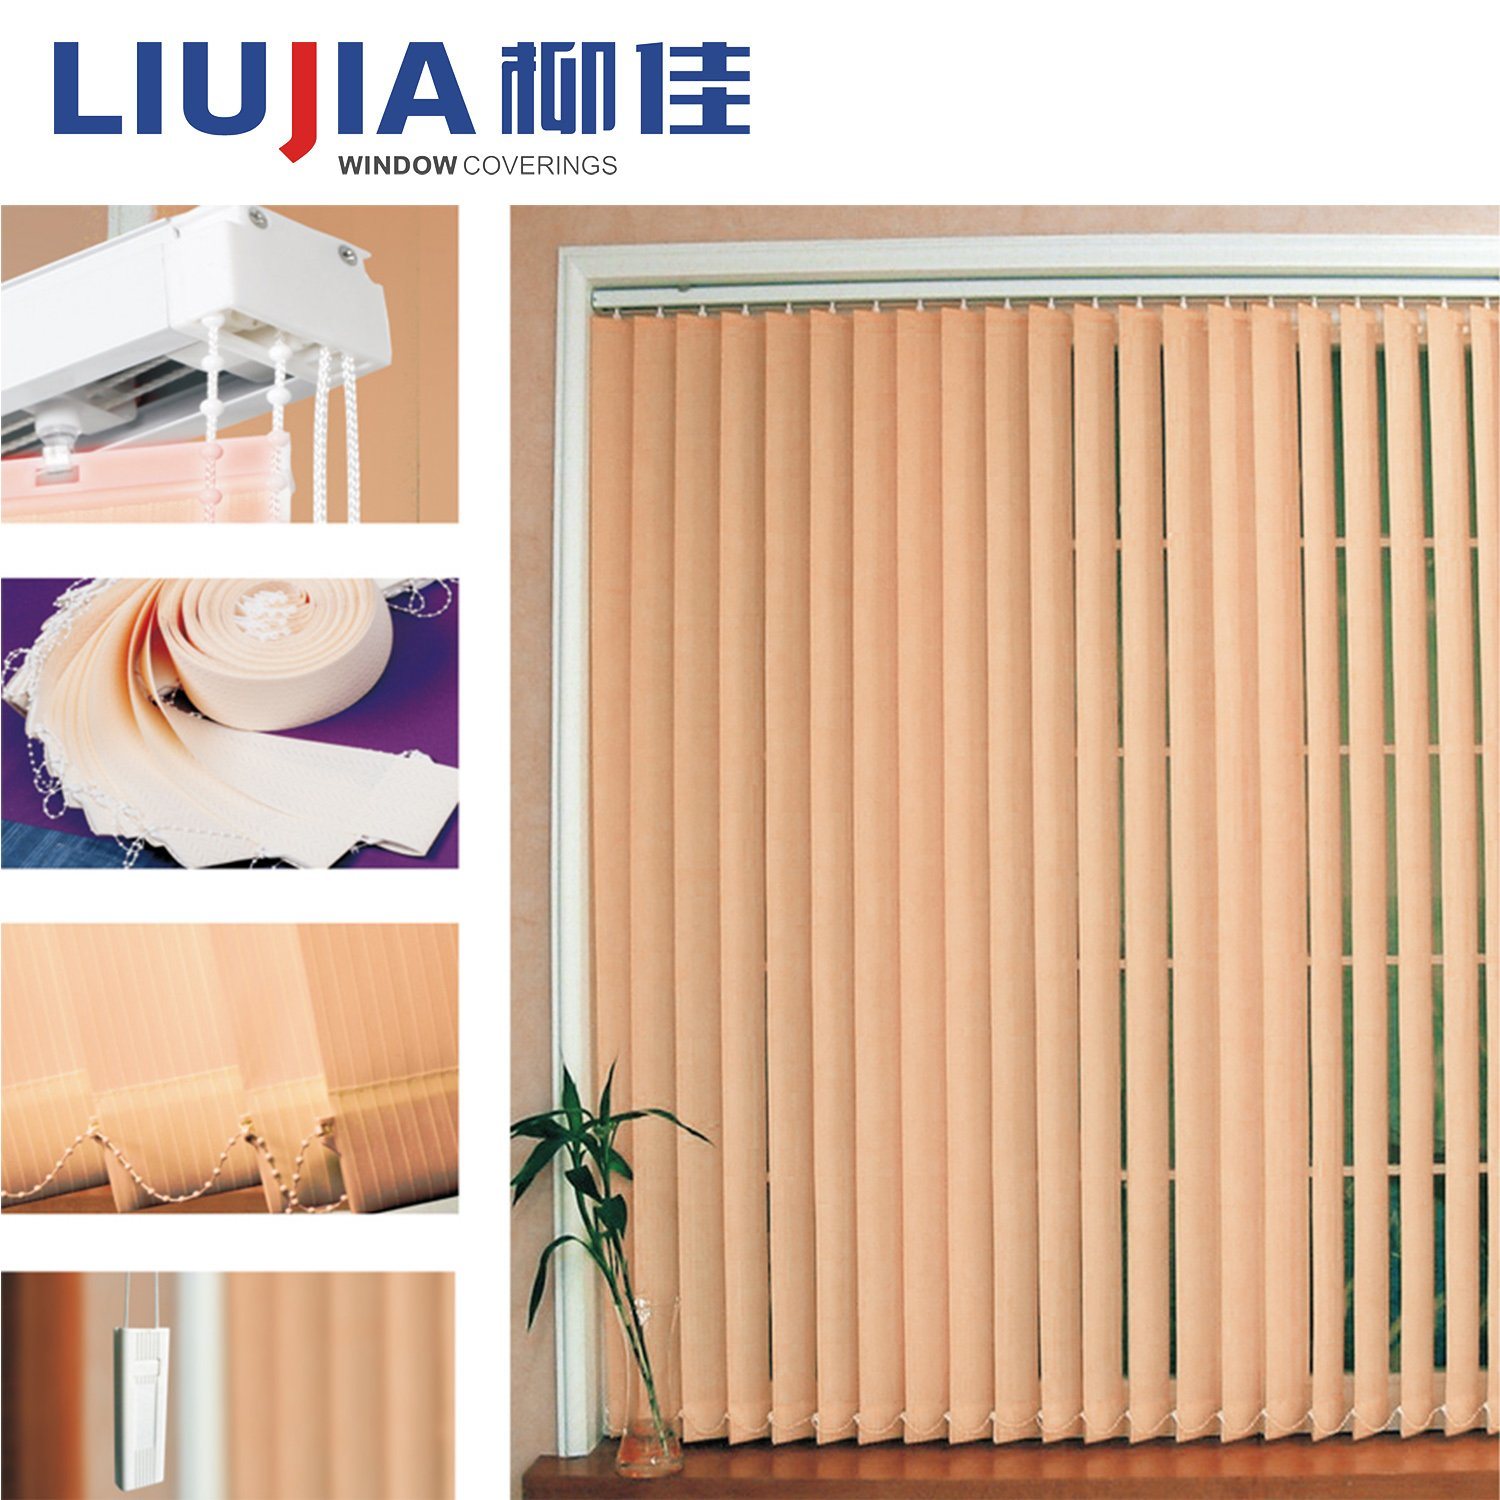 Indoor Manual Vertical Blinds /Curtain for Decoration